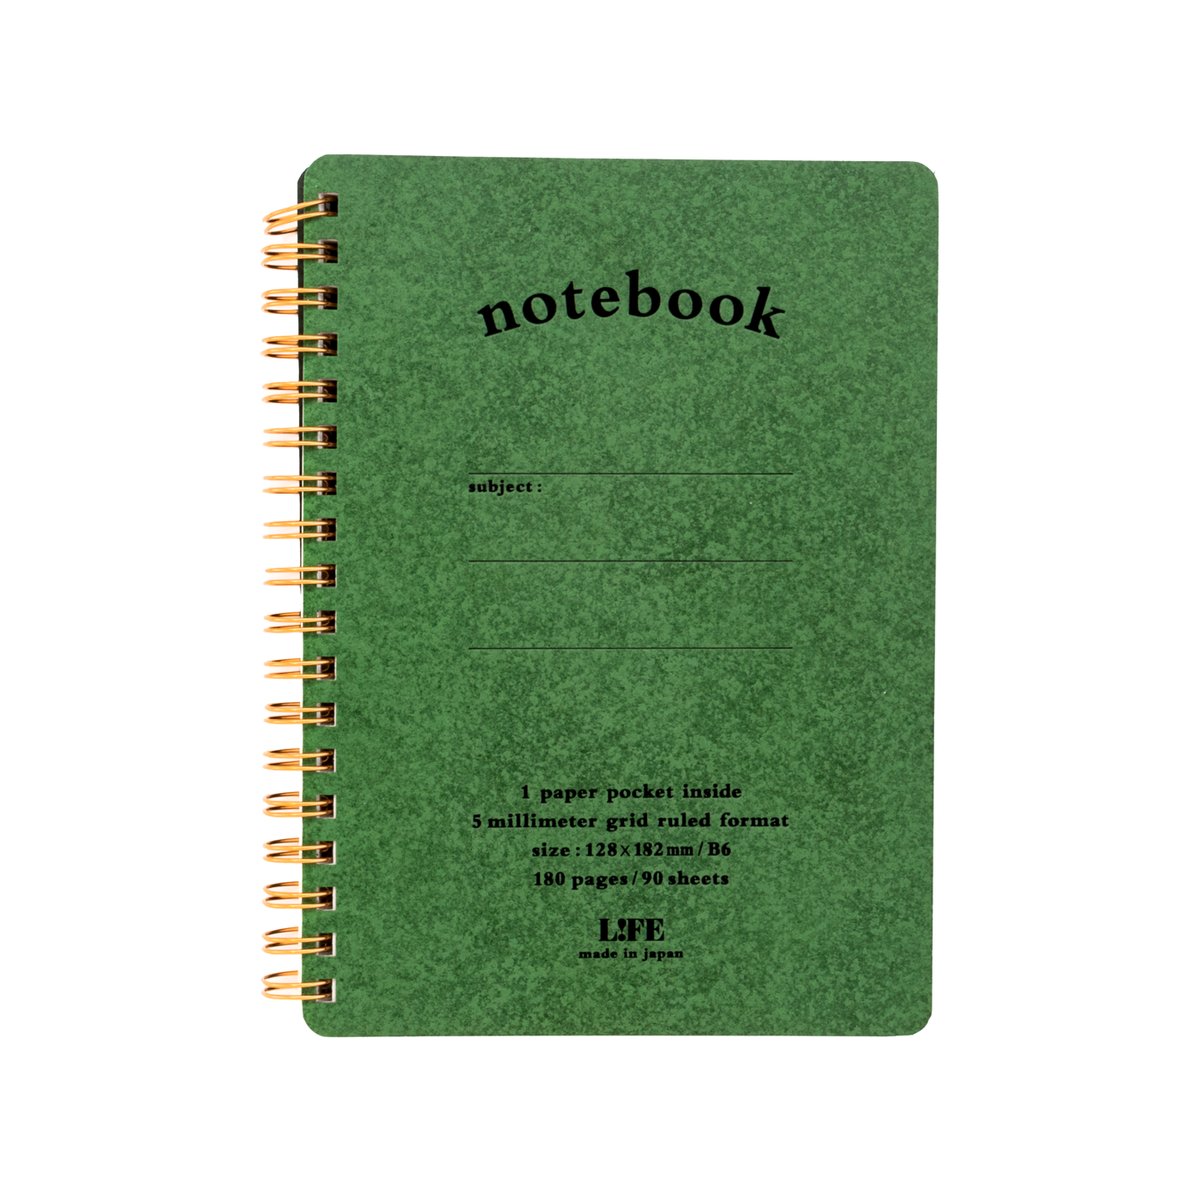 Life Stationery B6 Spiral Notebook 5mm Grid - Green